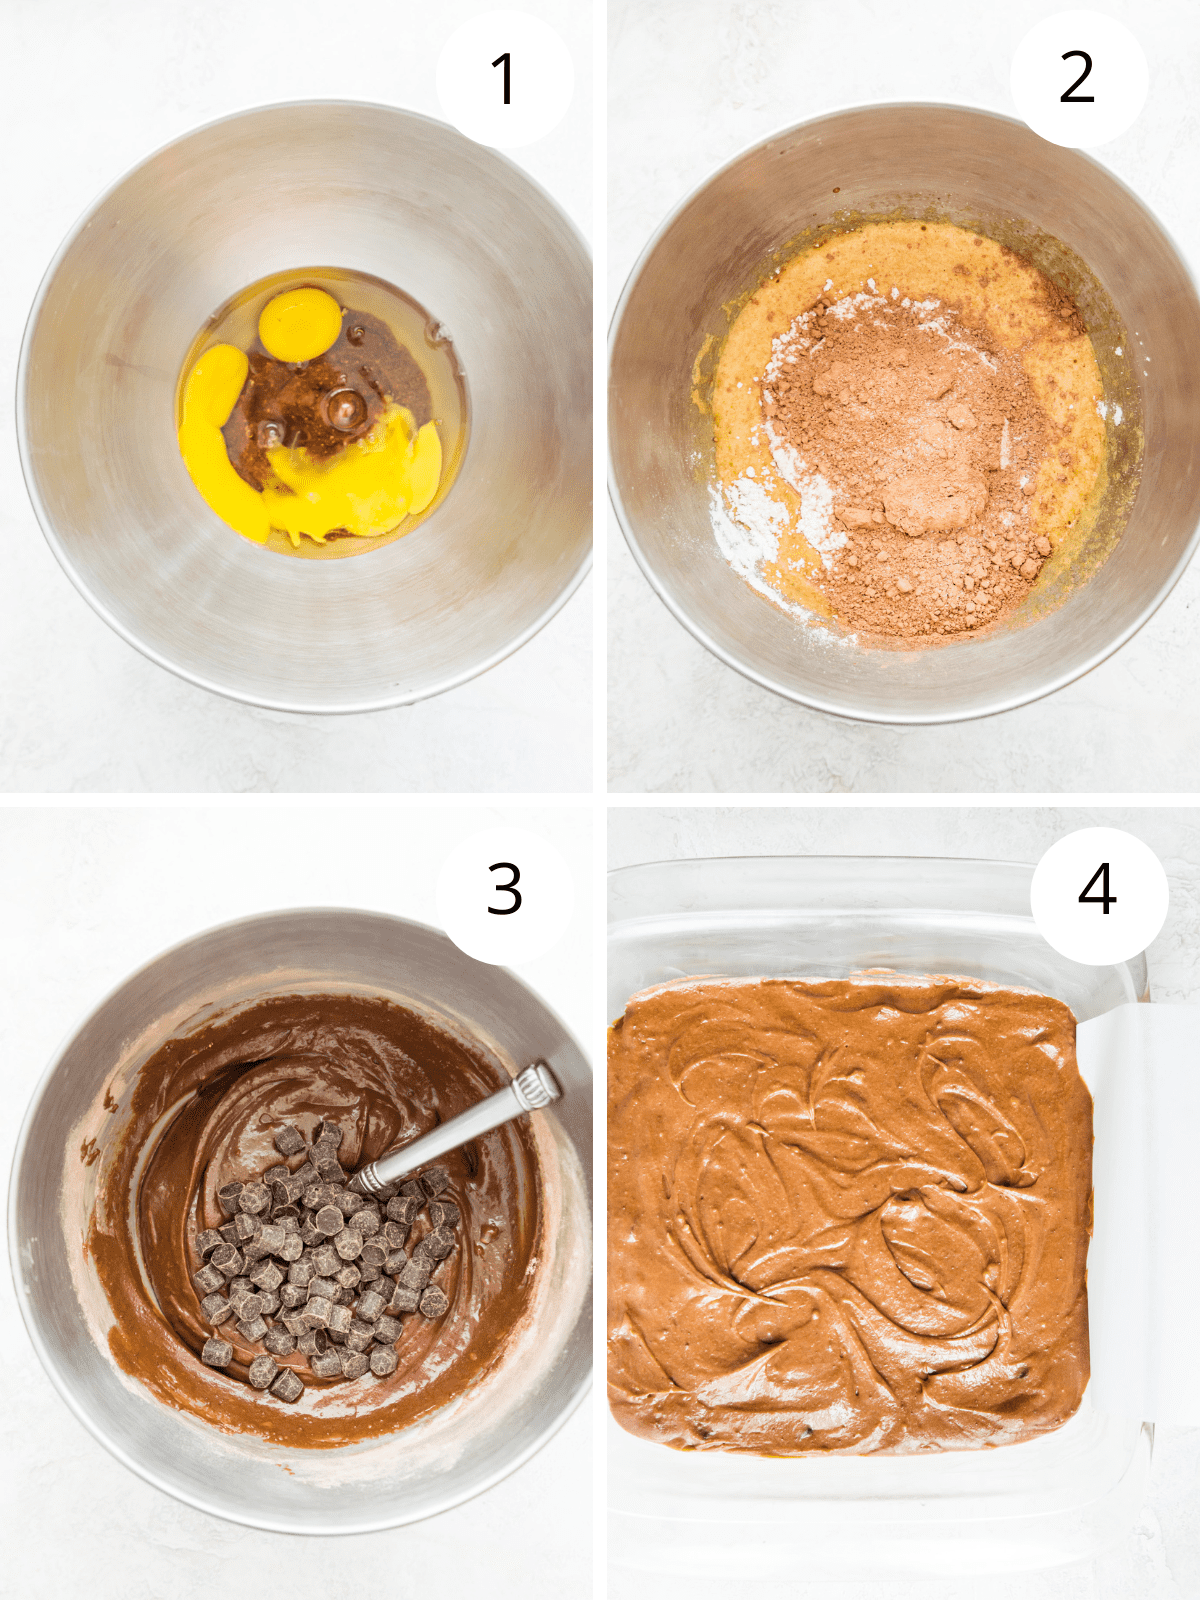 Step by step directions for making sweetened condensed milk brownies.